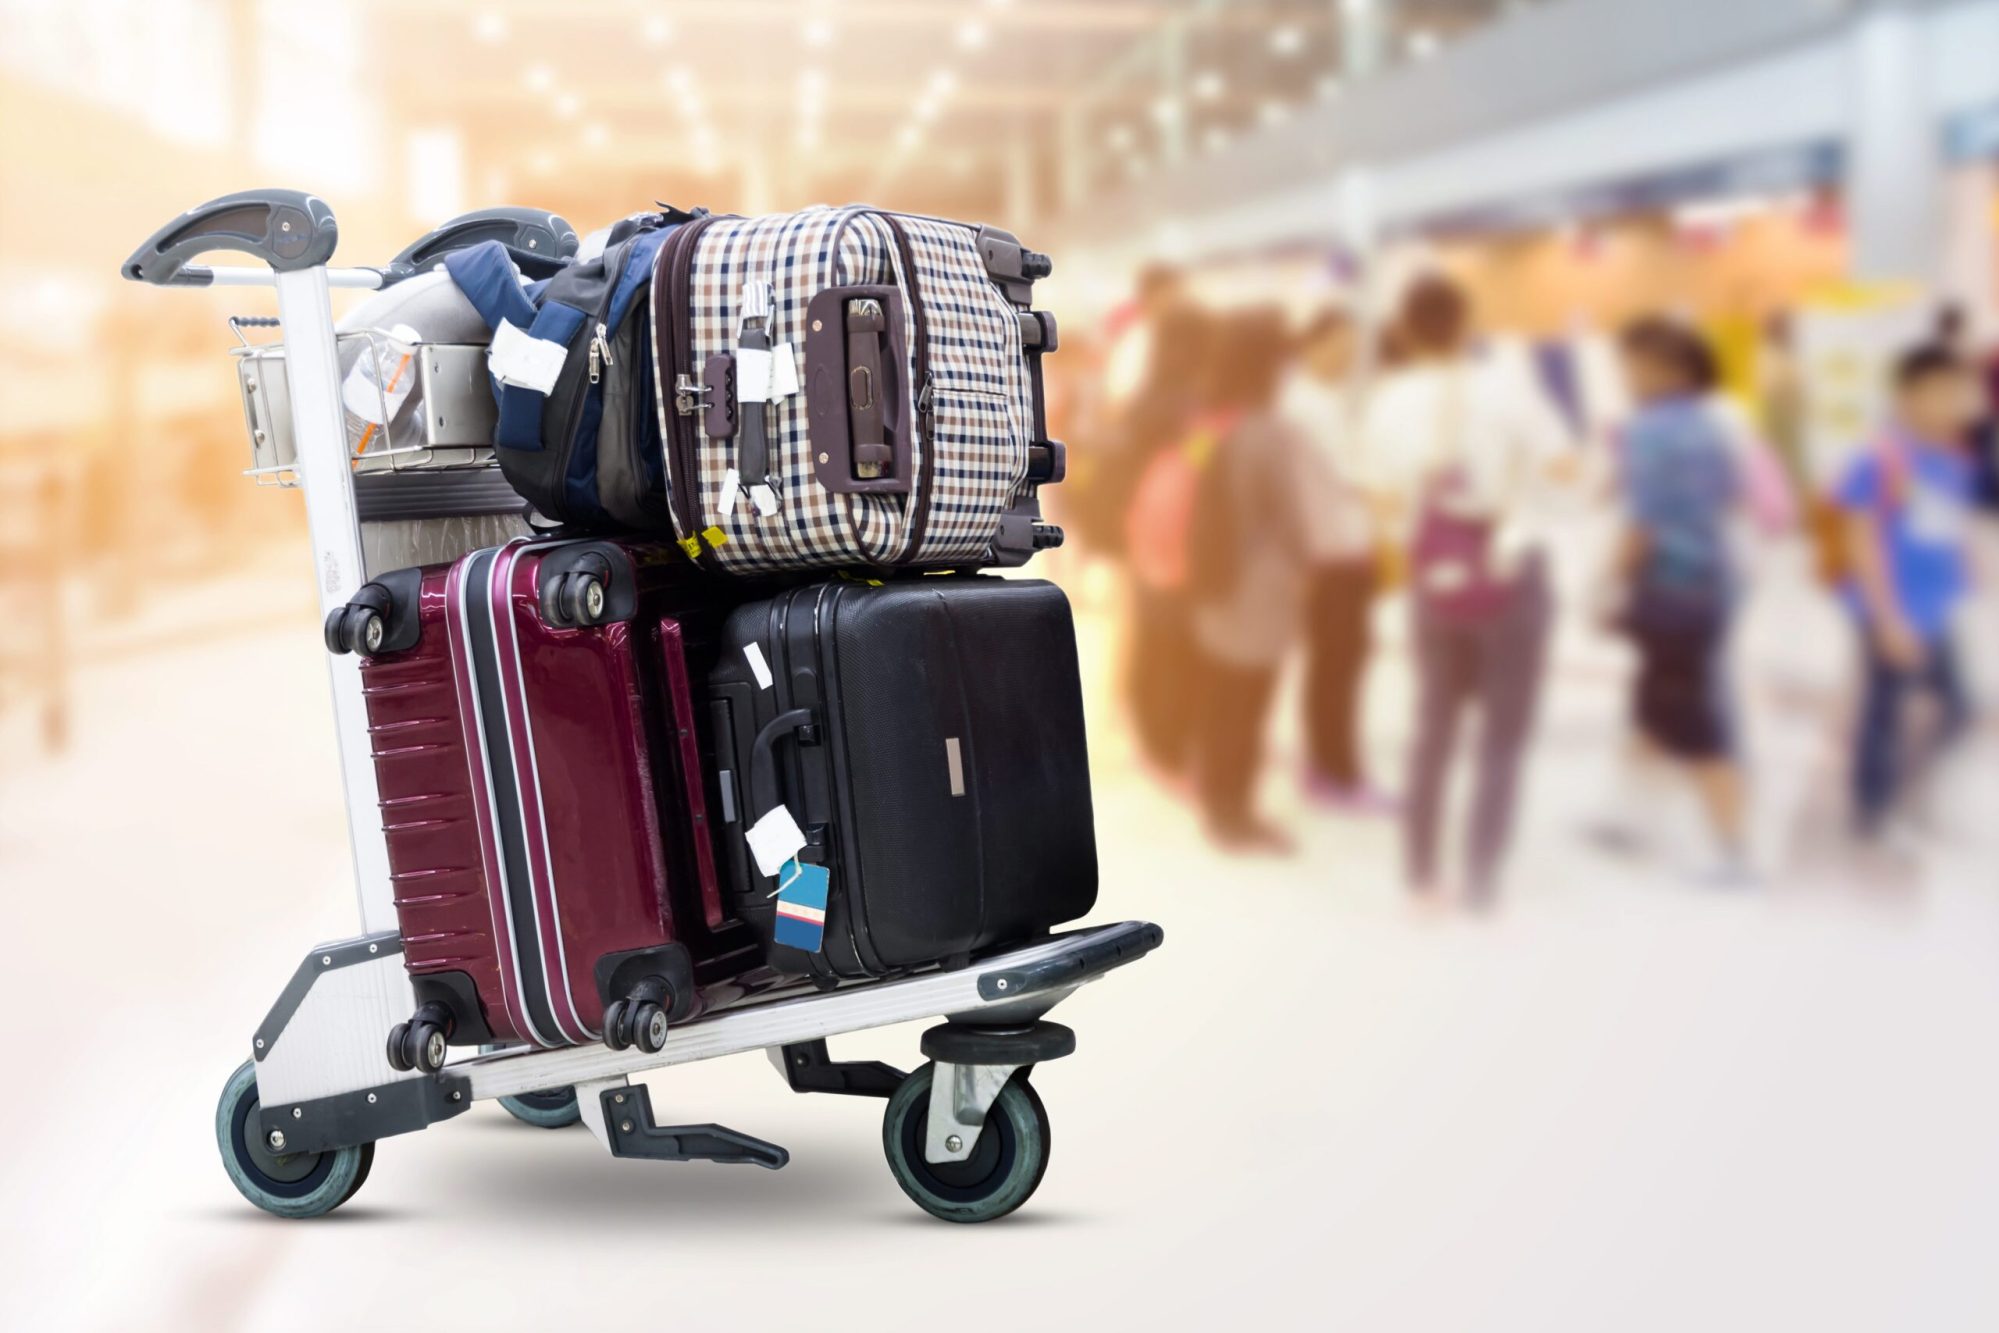 Luggage trolley with suitcases